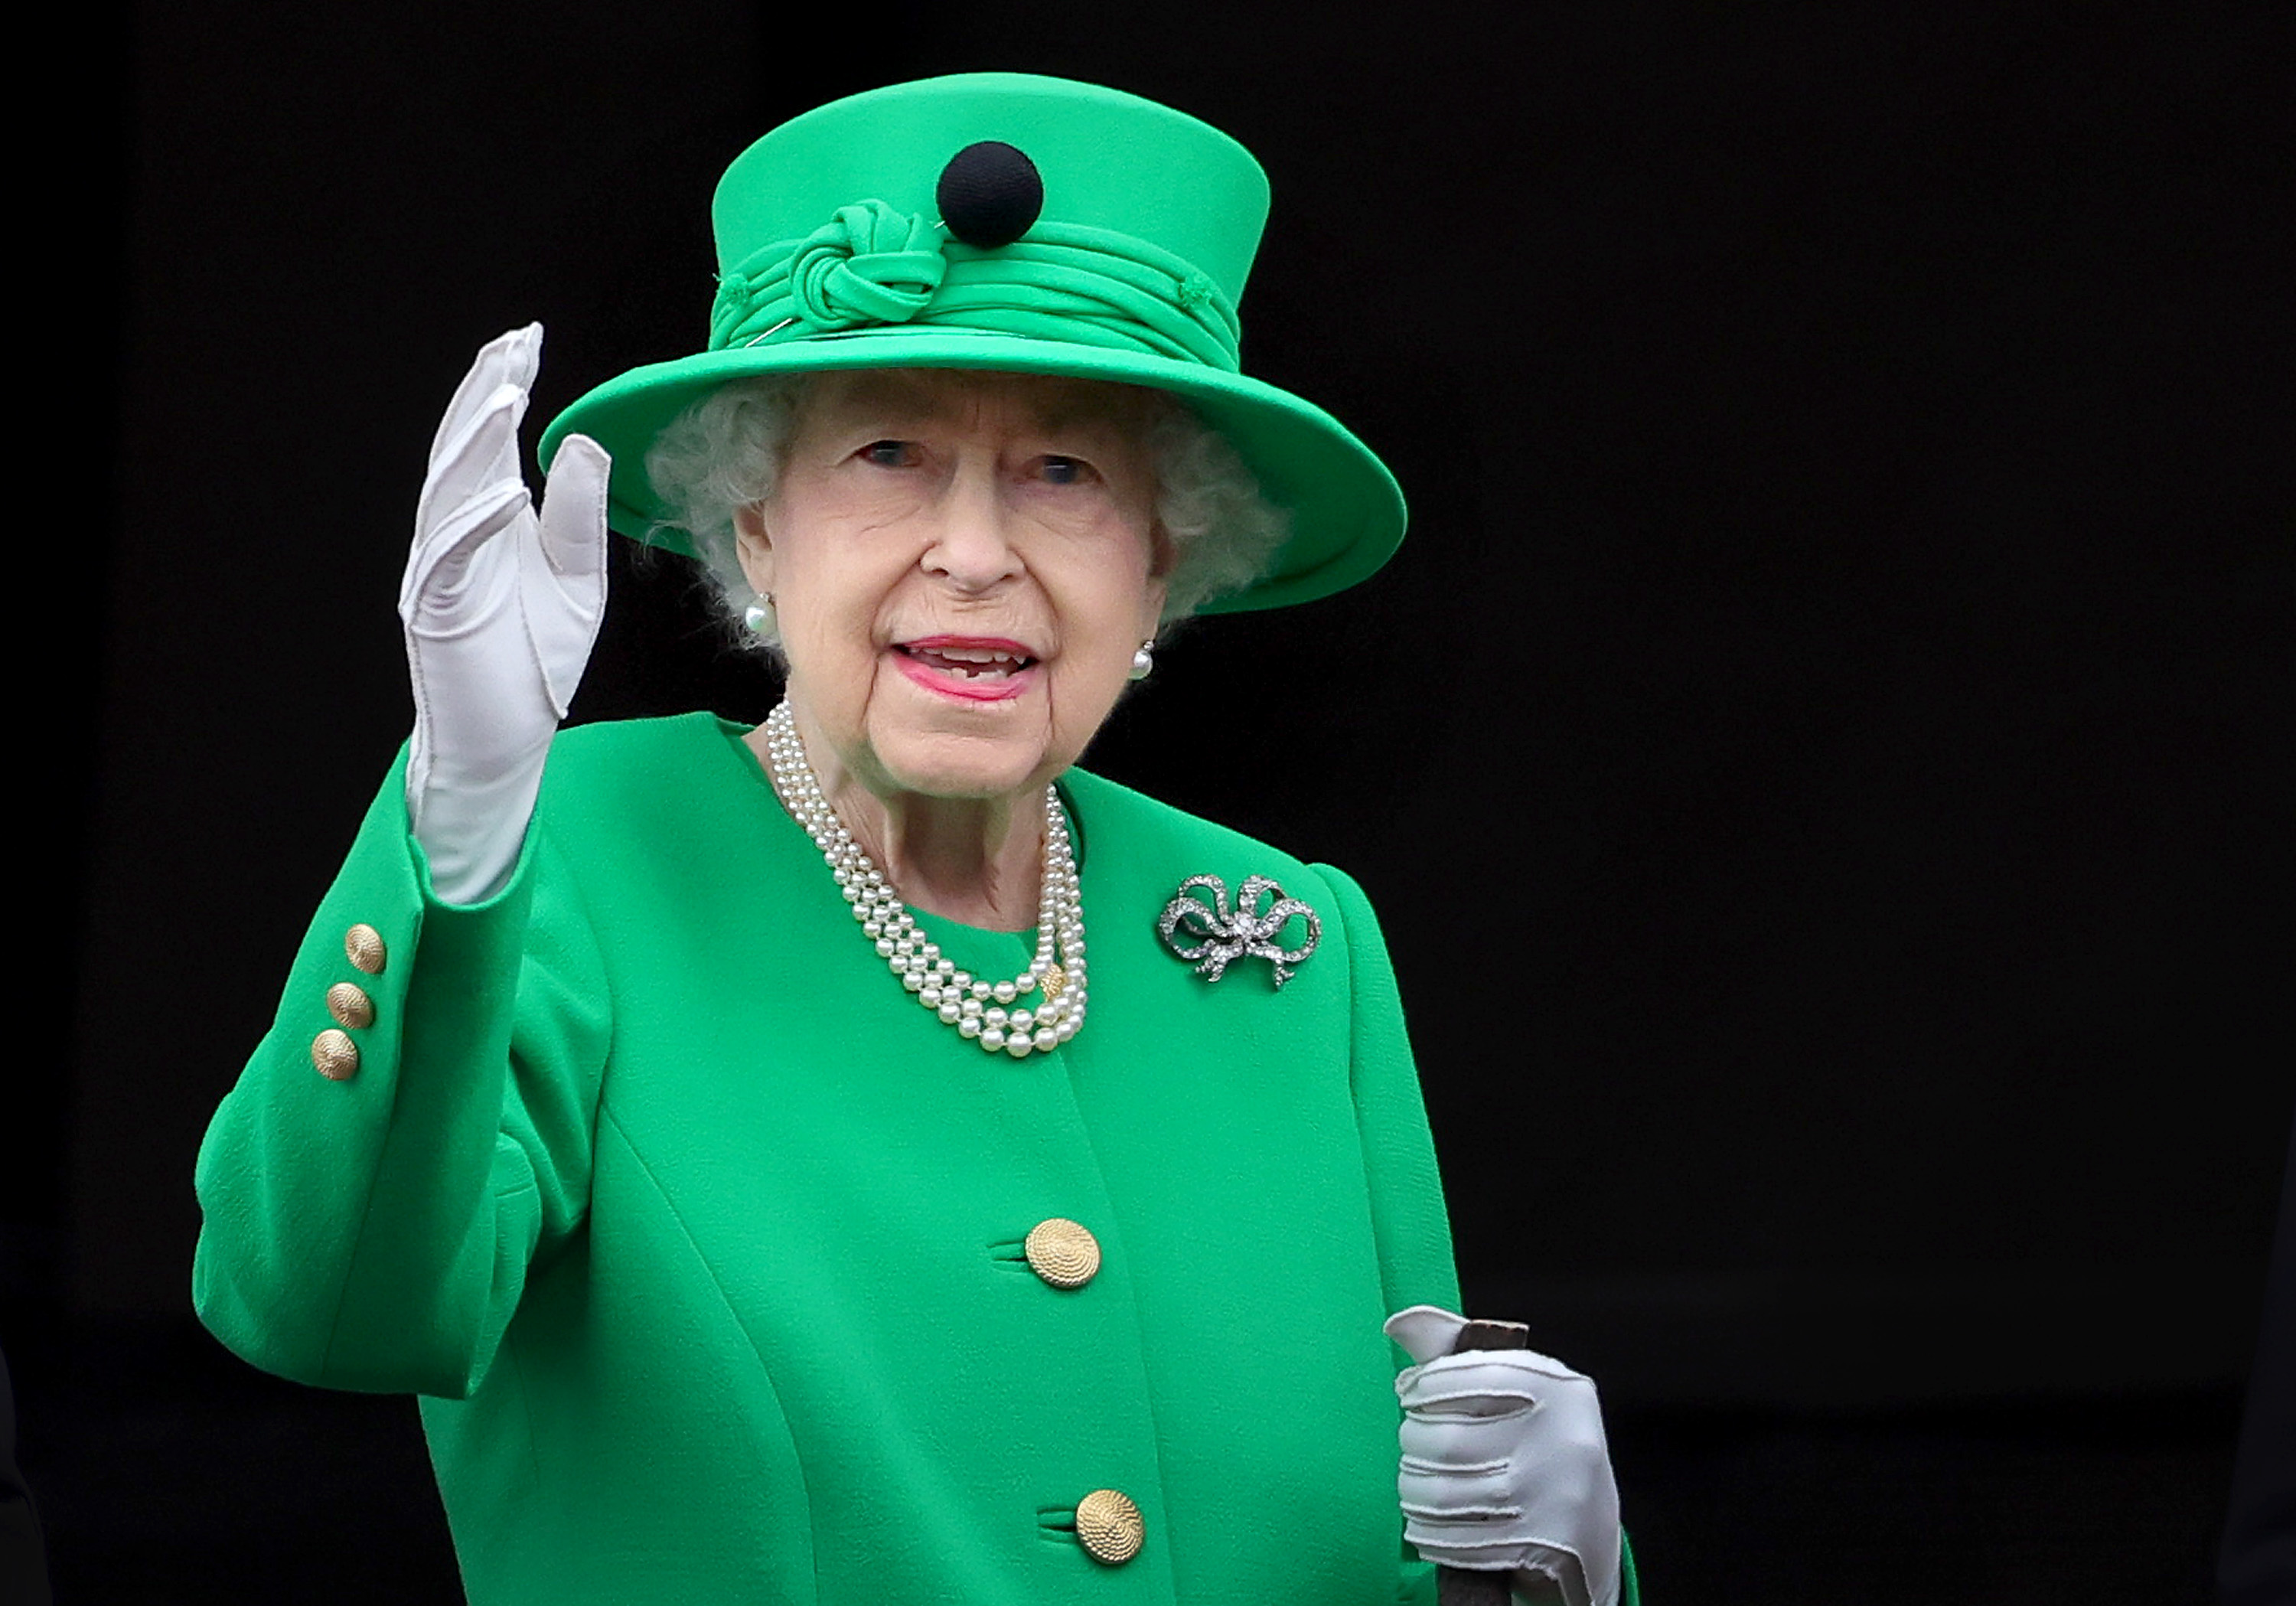 How Much Does the Royal Family Cost UK Taxpayers? Here's a